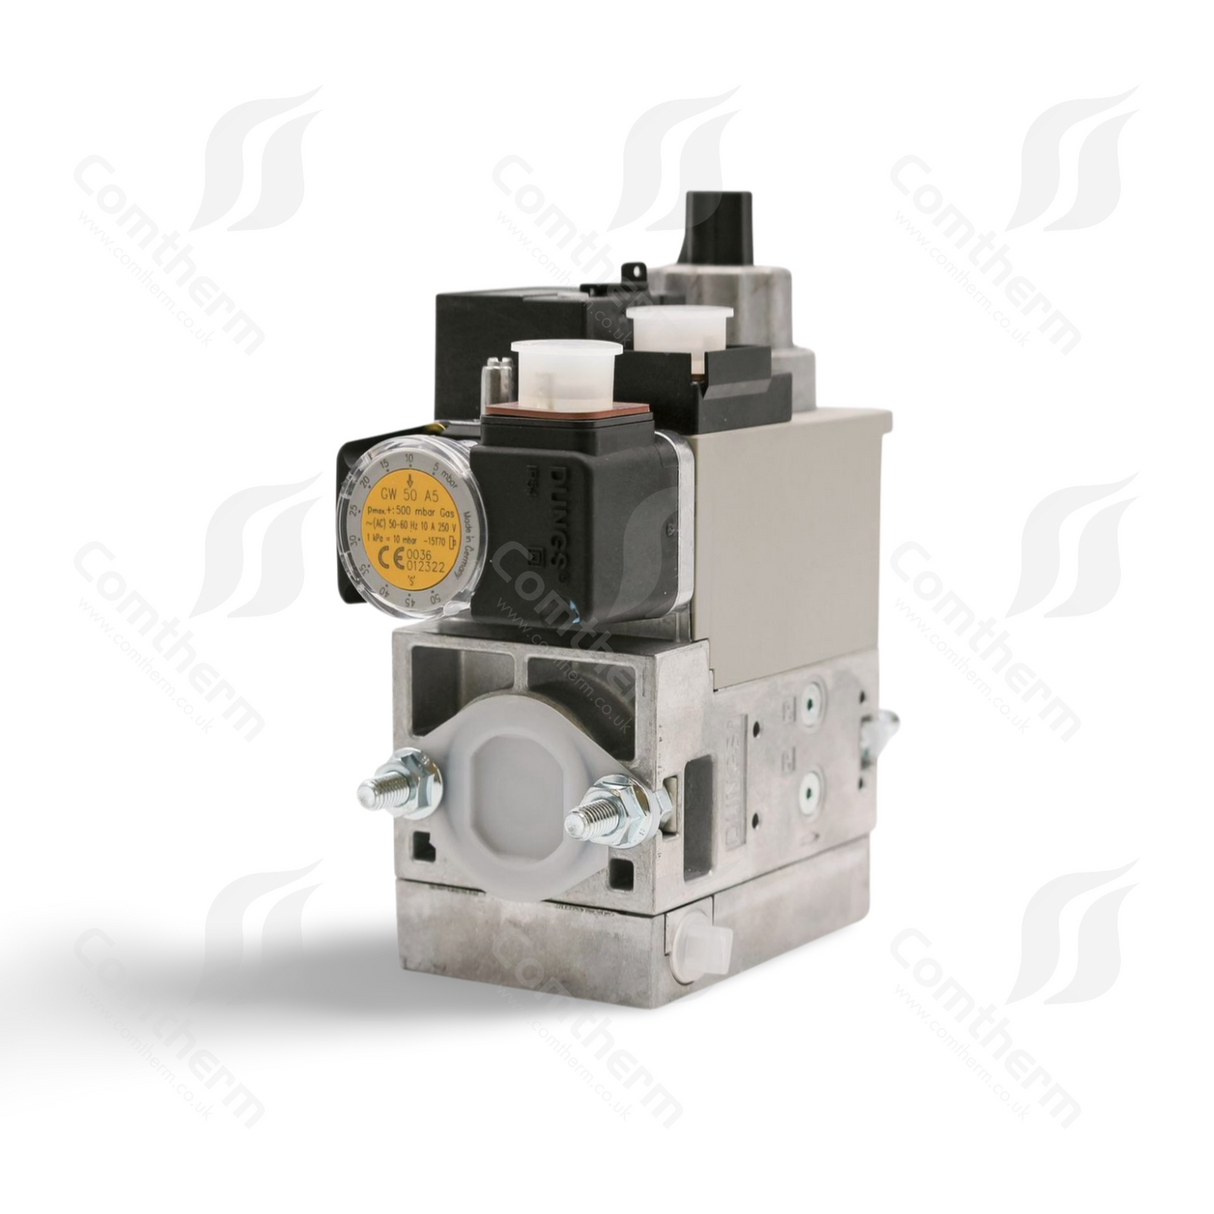 Dungs MB-DLE 407 B01 S20 + GW50A5 Multiblock-Gasventil – 230 V 